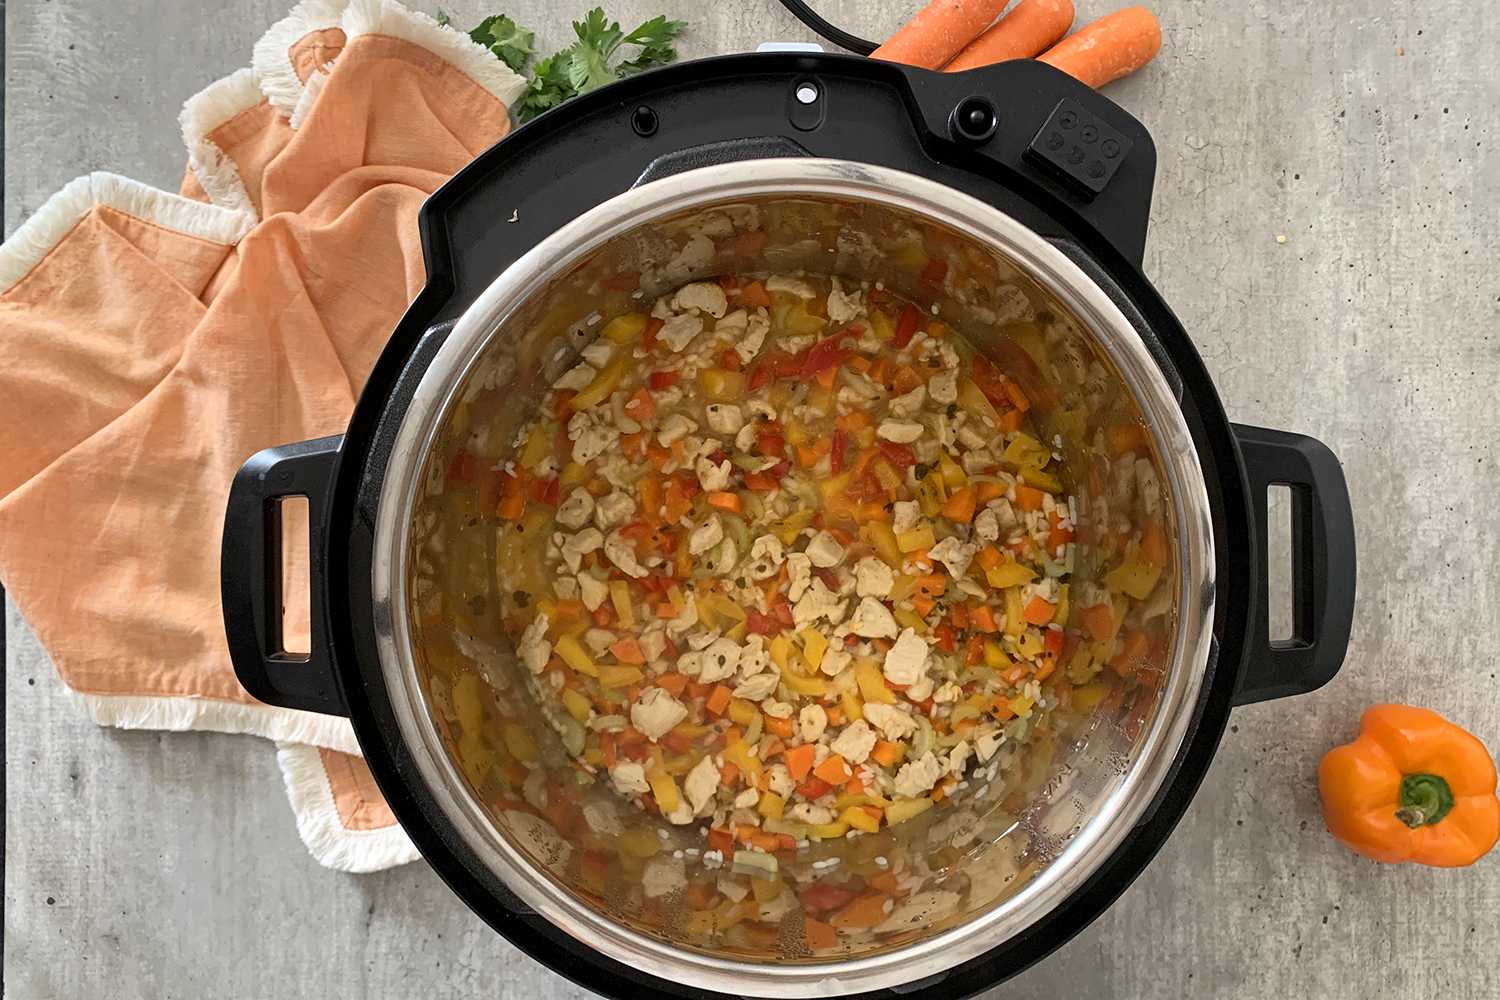 The Whole Family Will Love This Fast and Filling Instant Pot Chicken Stew